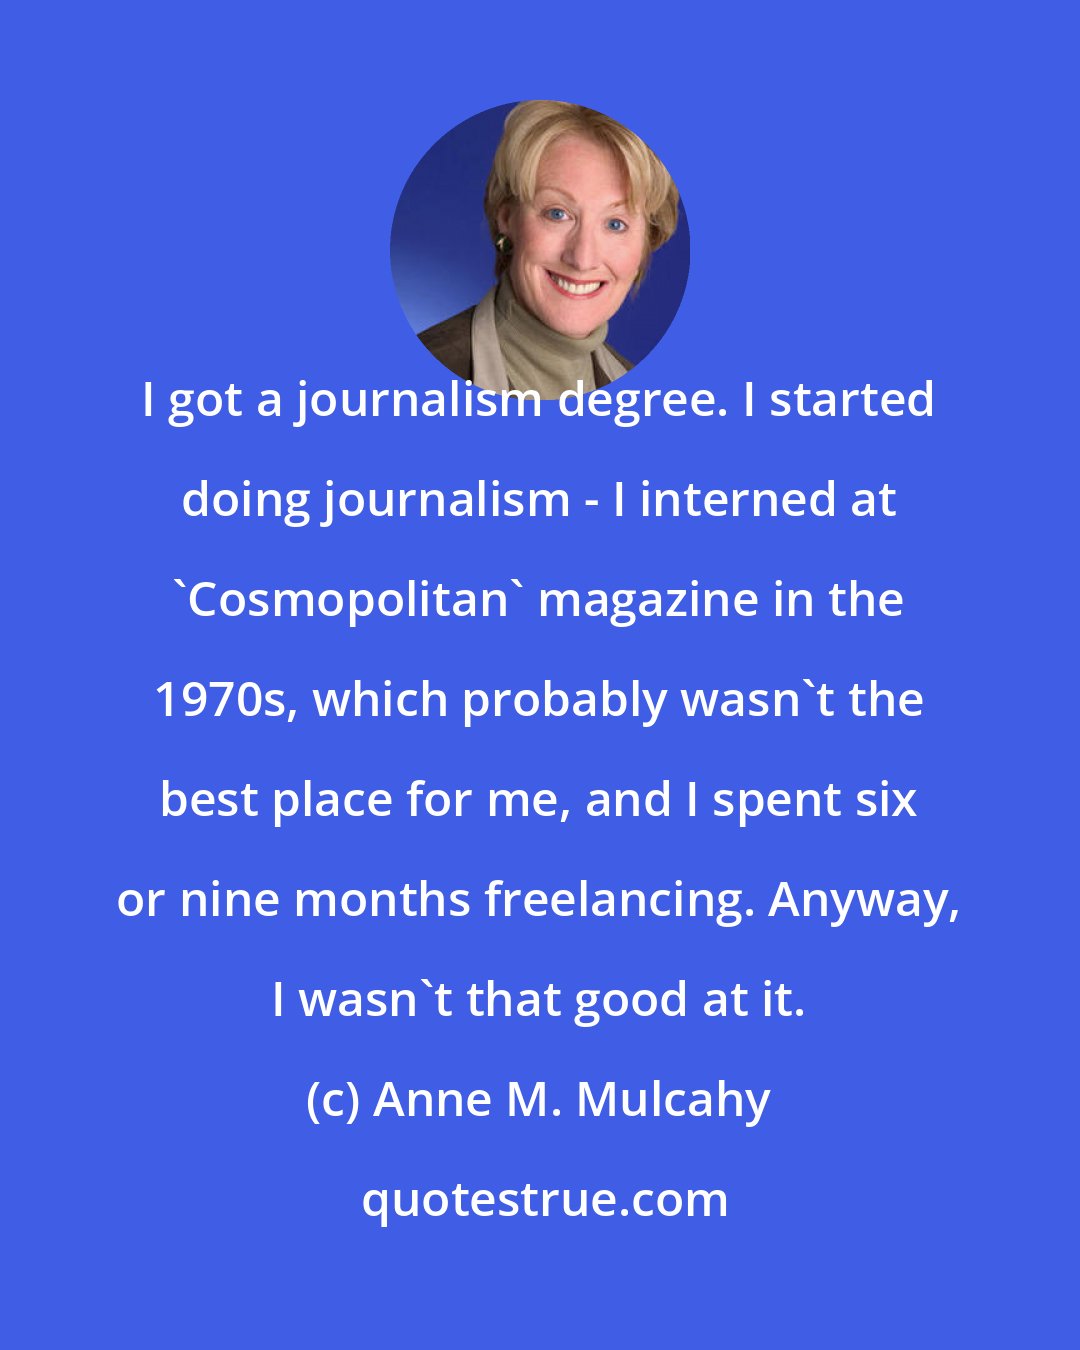 Anne M. Mulcahy: I got a journalism degree. I started doing journalism - I interned at 'Cosmopolitan' magazine in the 1970s, which probably wasn't the best place for me, and I spent six or nine months freelancing. Anyway, I wasn't that good at it.